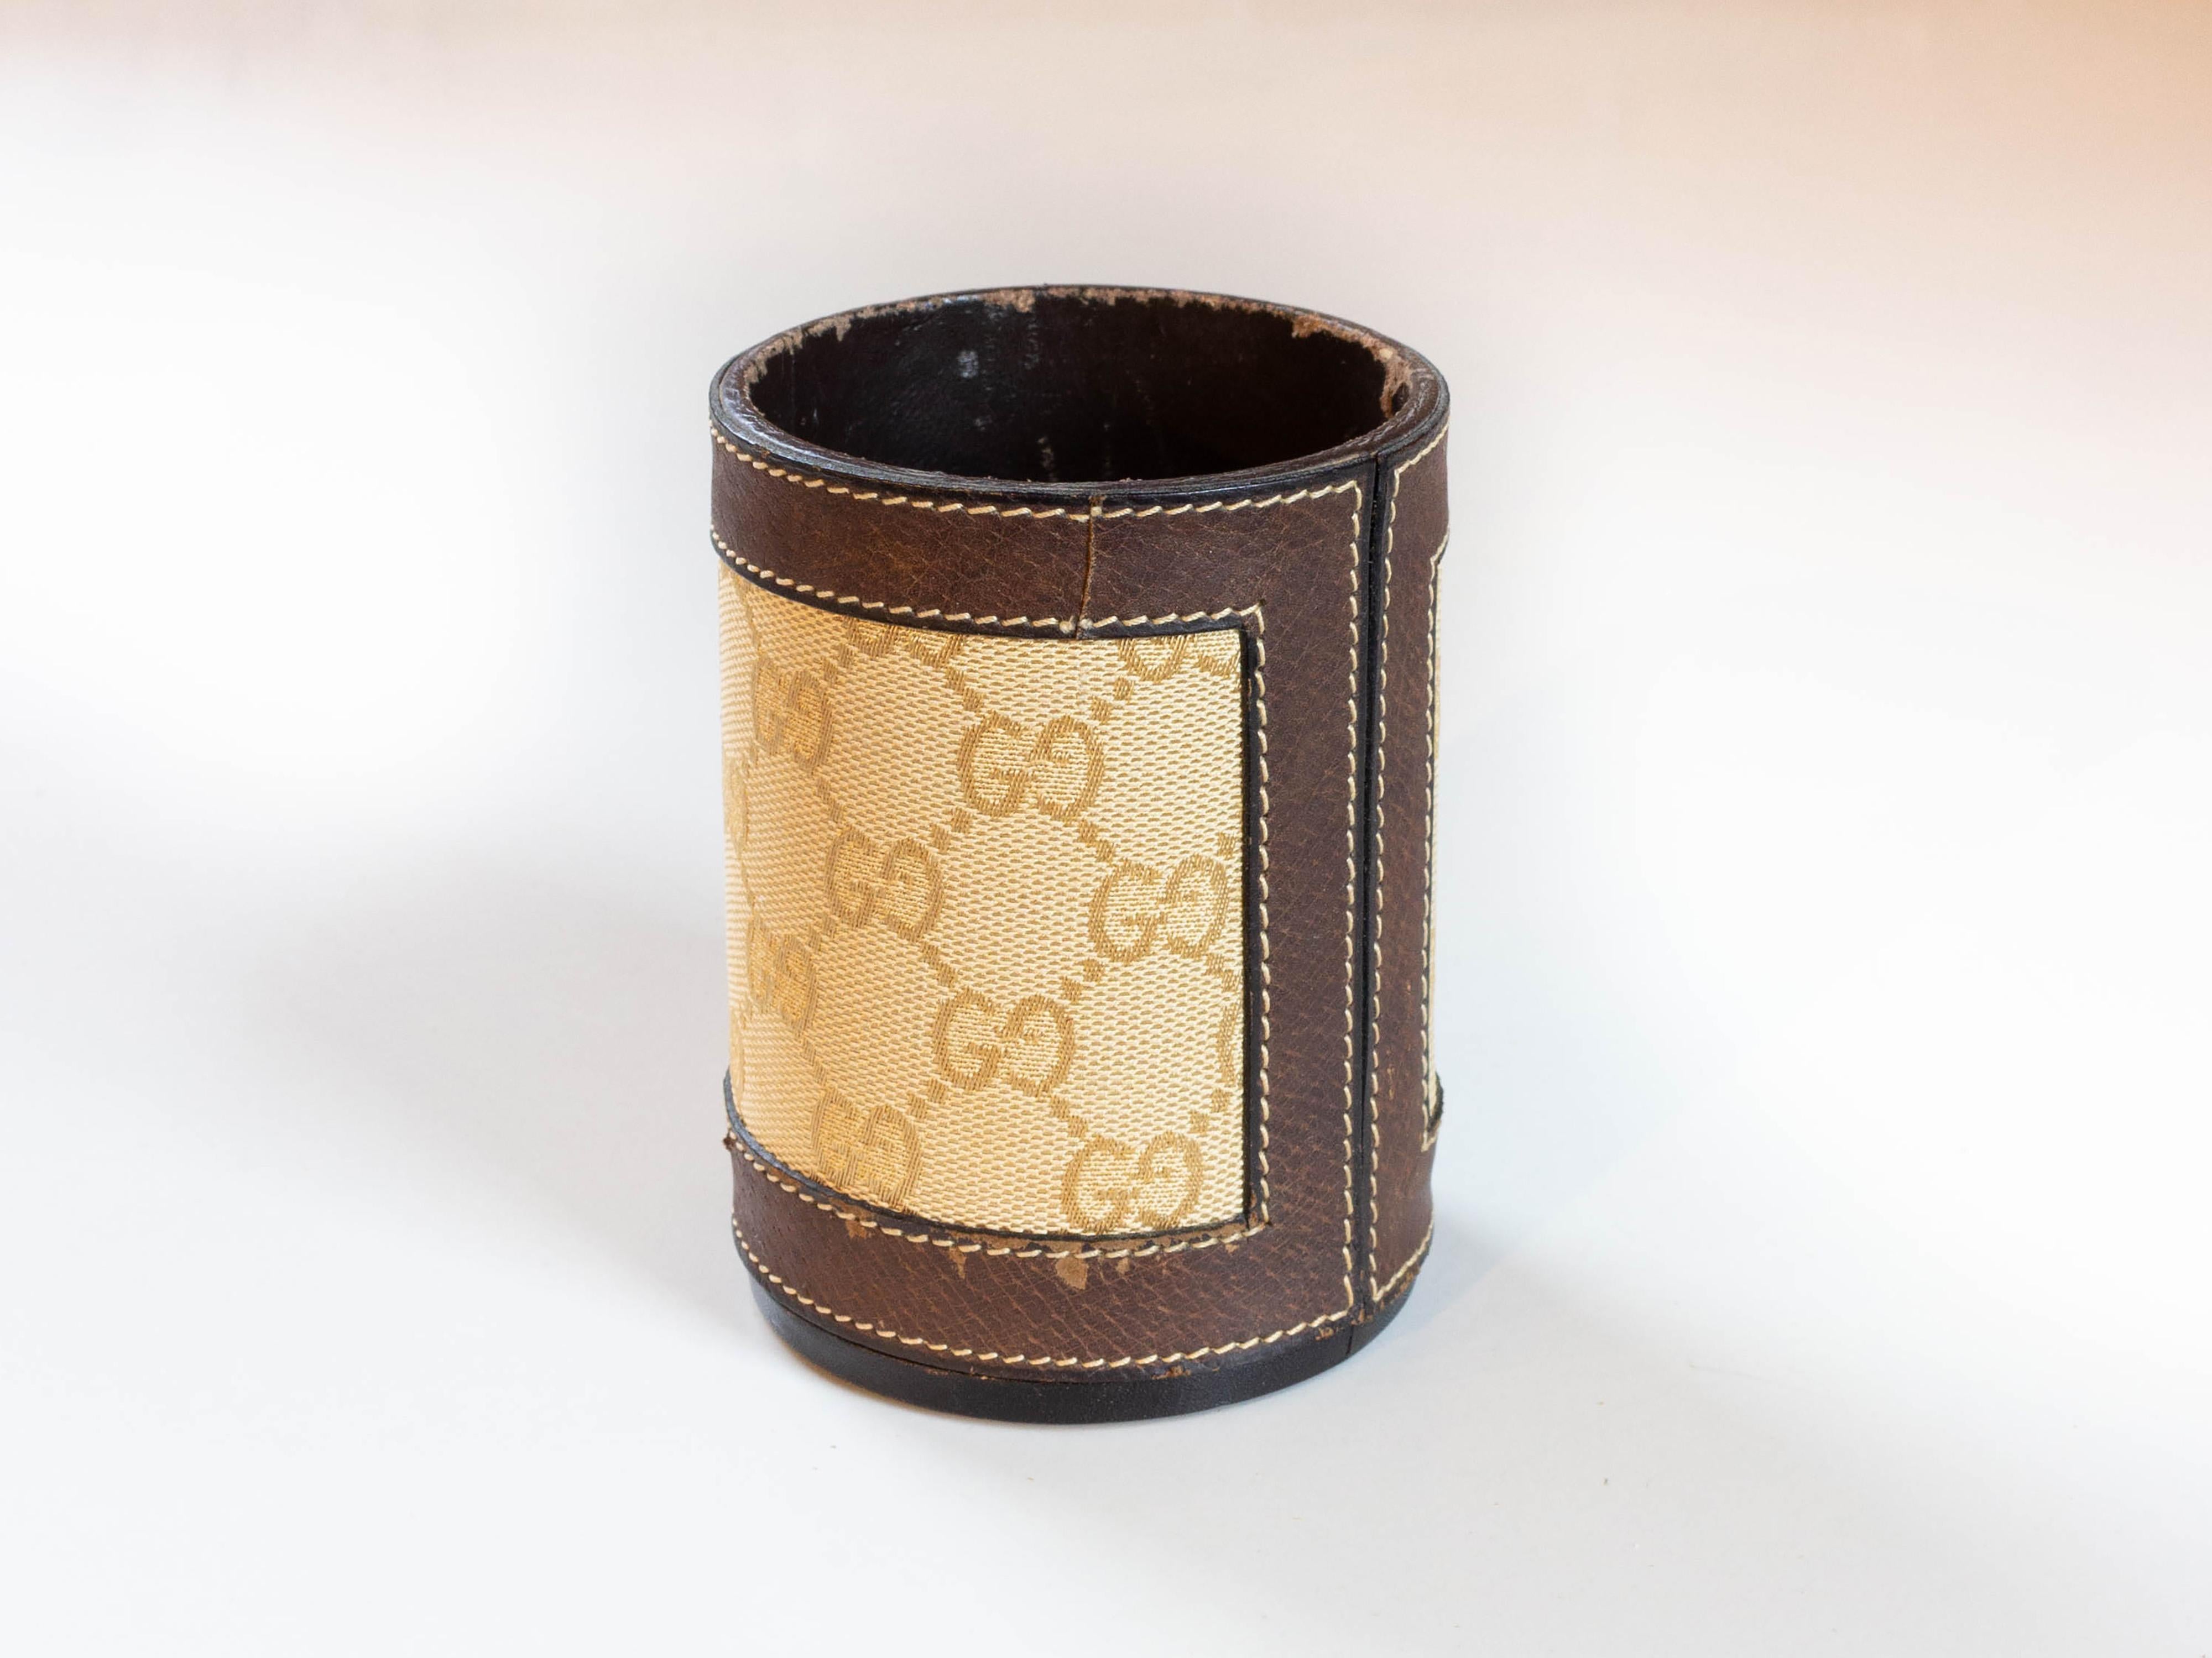 Vintage 1970s Gucci pencil cup holder with gold GG logo canvas and brown leather trim.